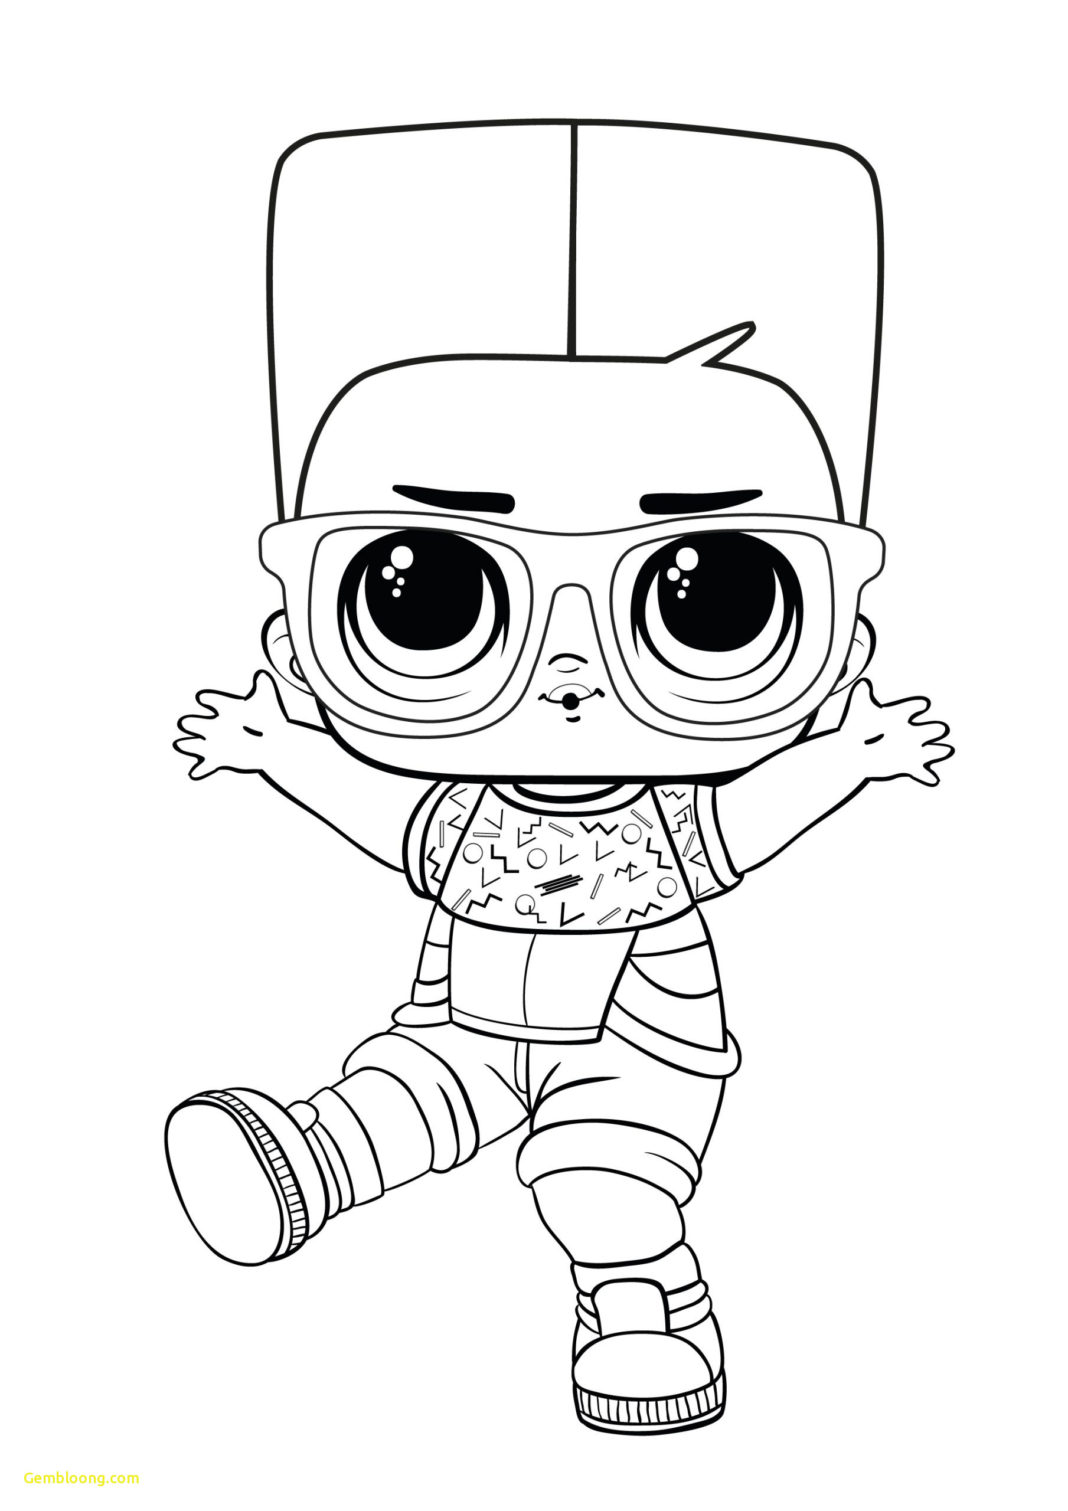 Coloring Pages : Boy And Girl Body Soul Colouring For Boys A Page ...